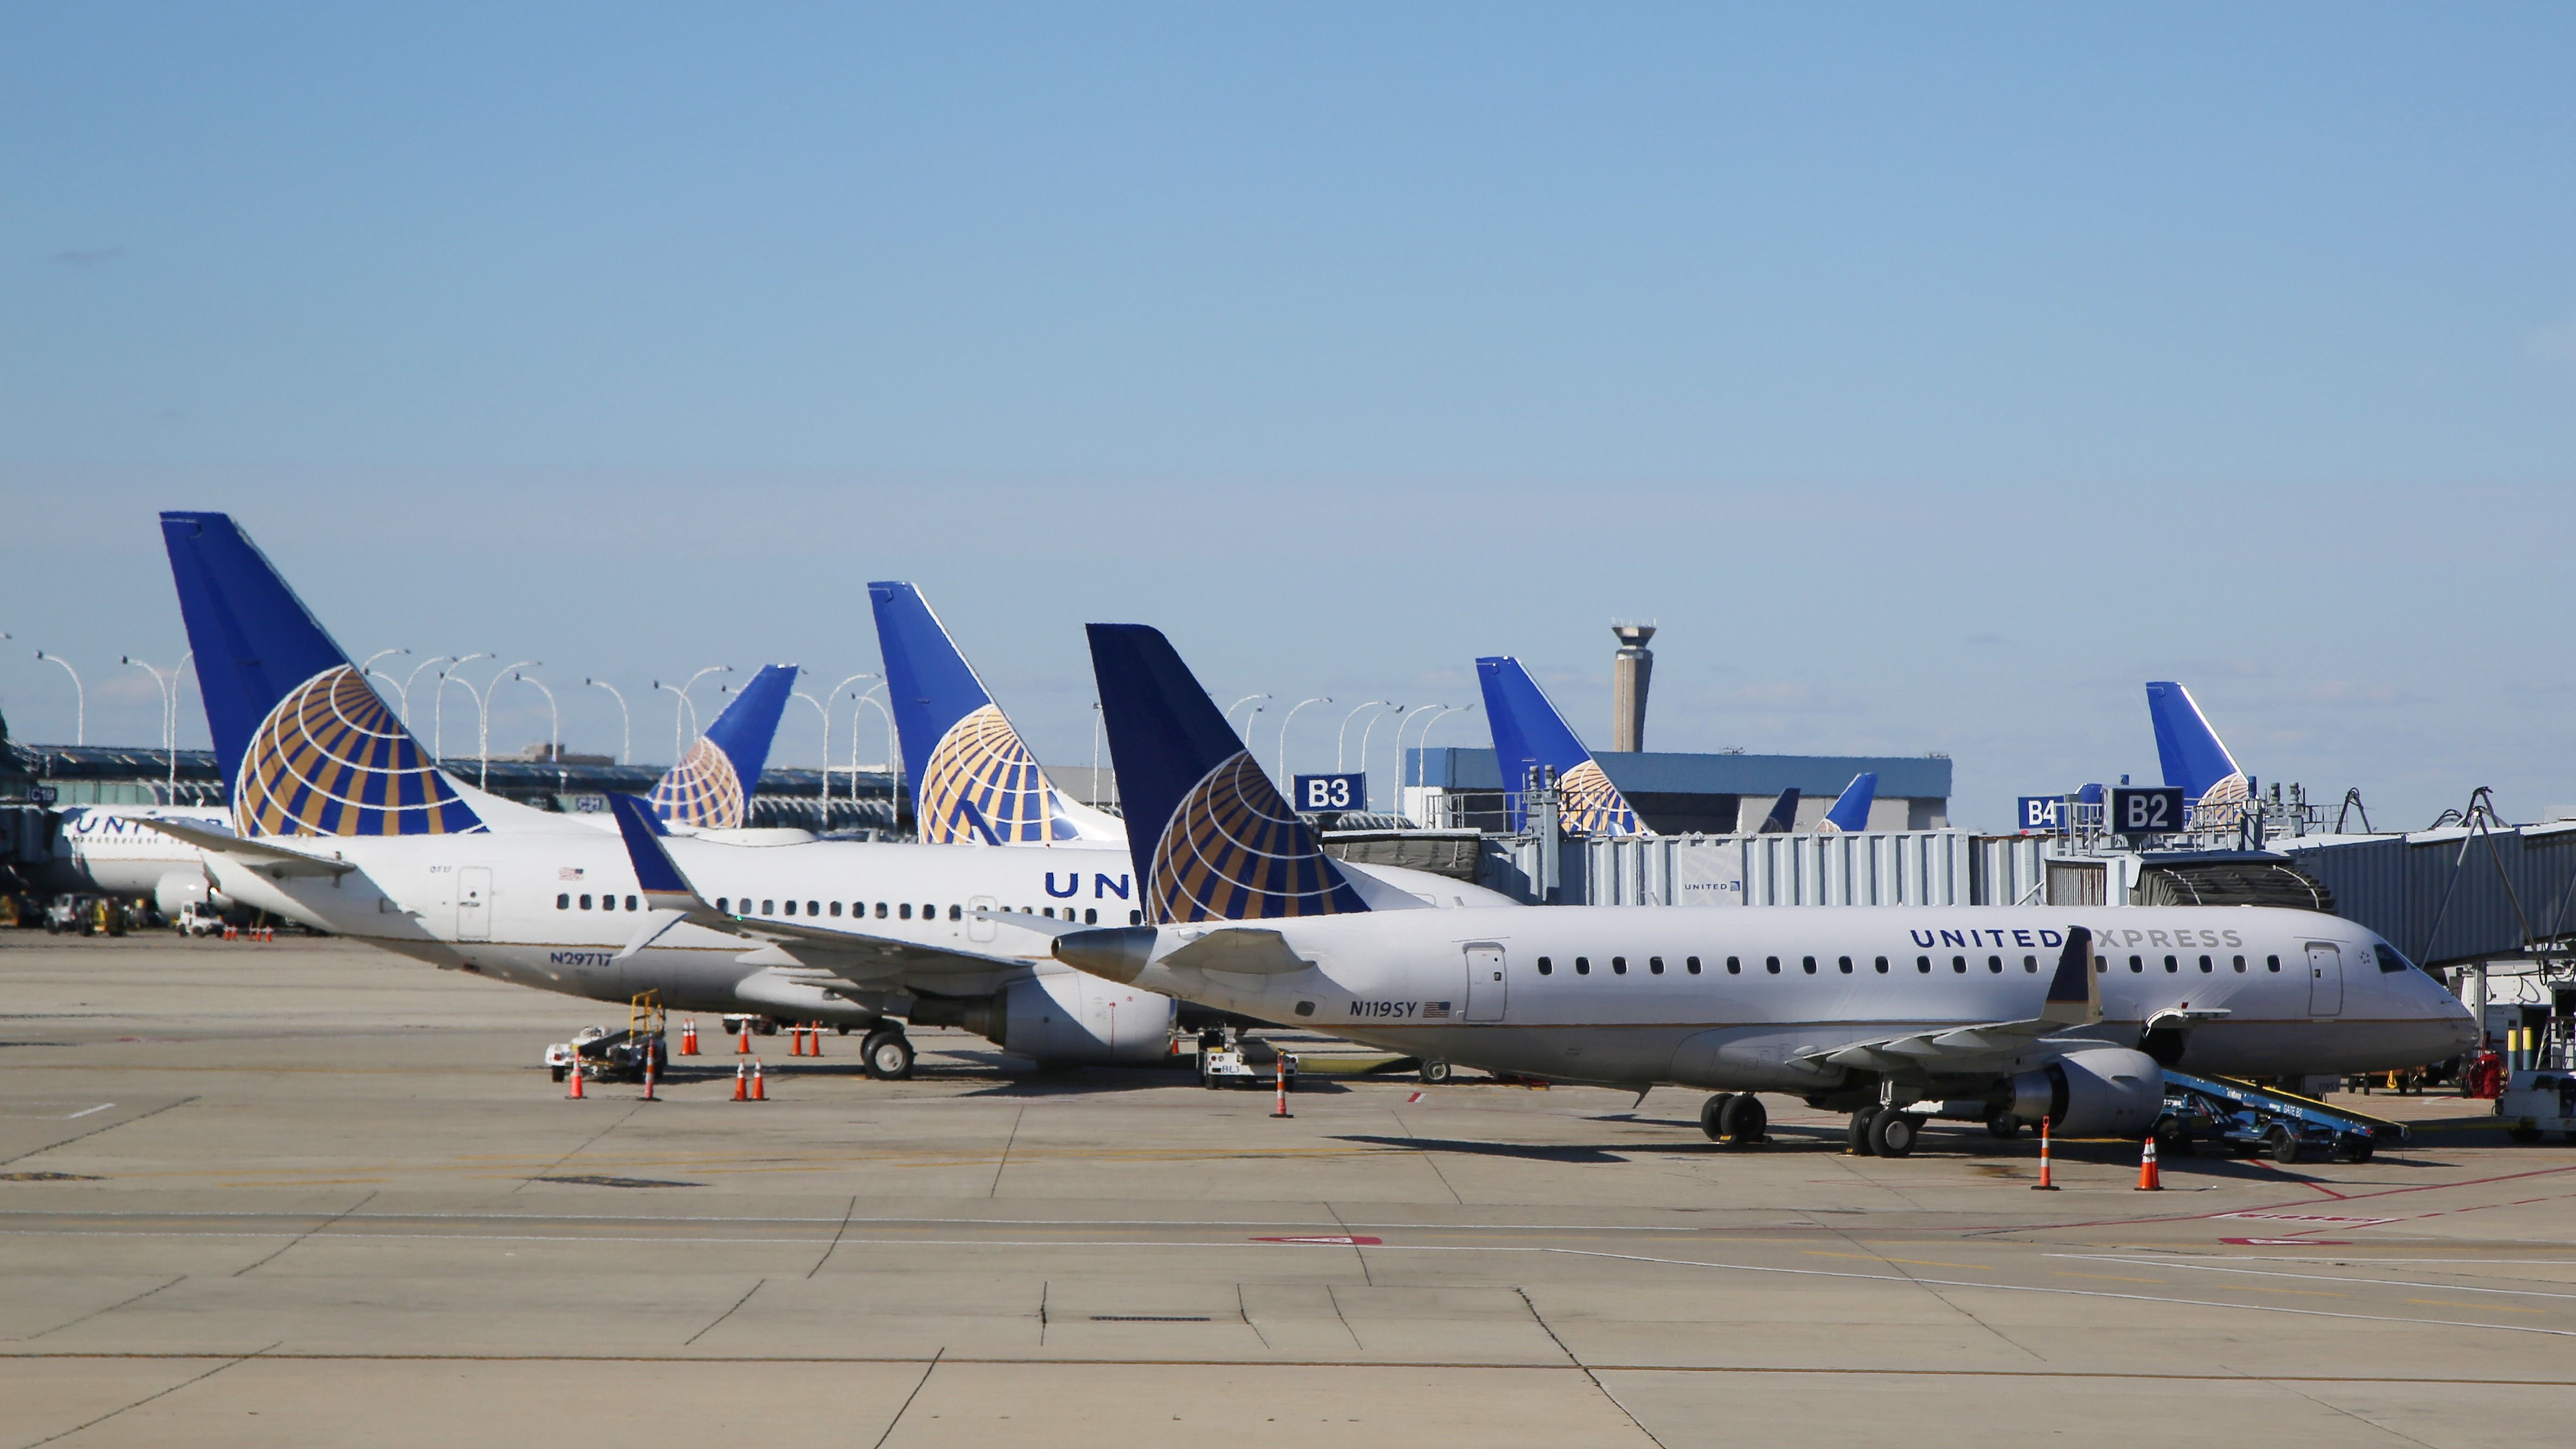 Multiple United Airlines Aircraft parked on an airport apron.